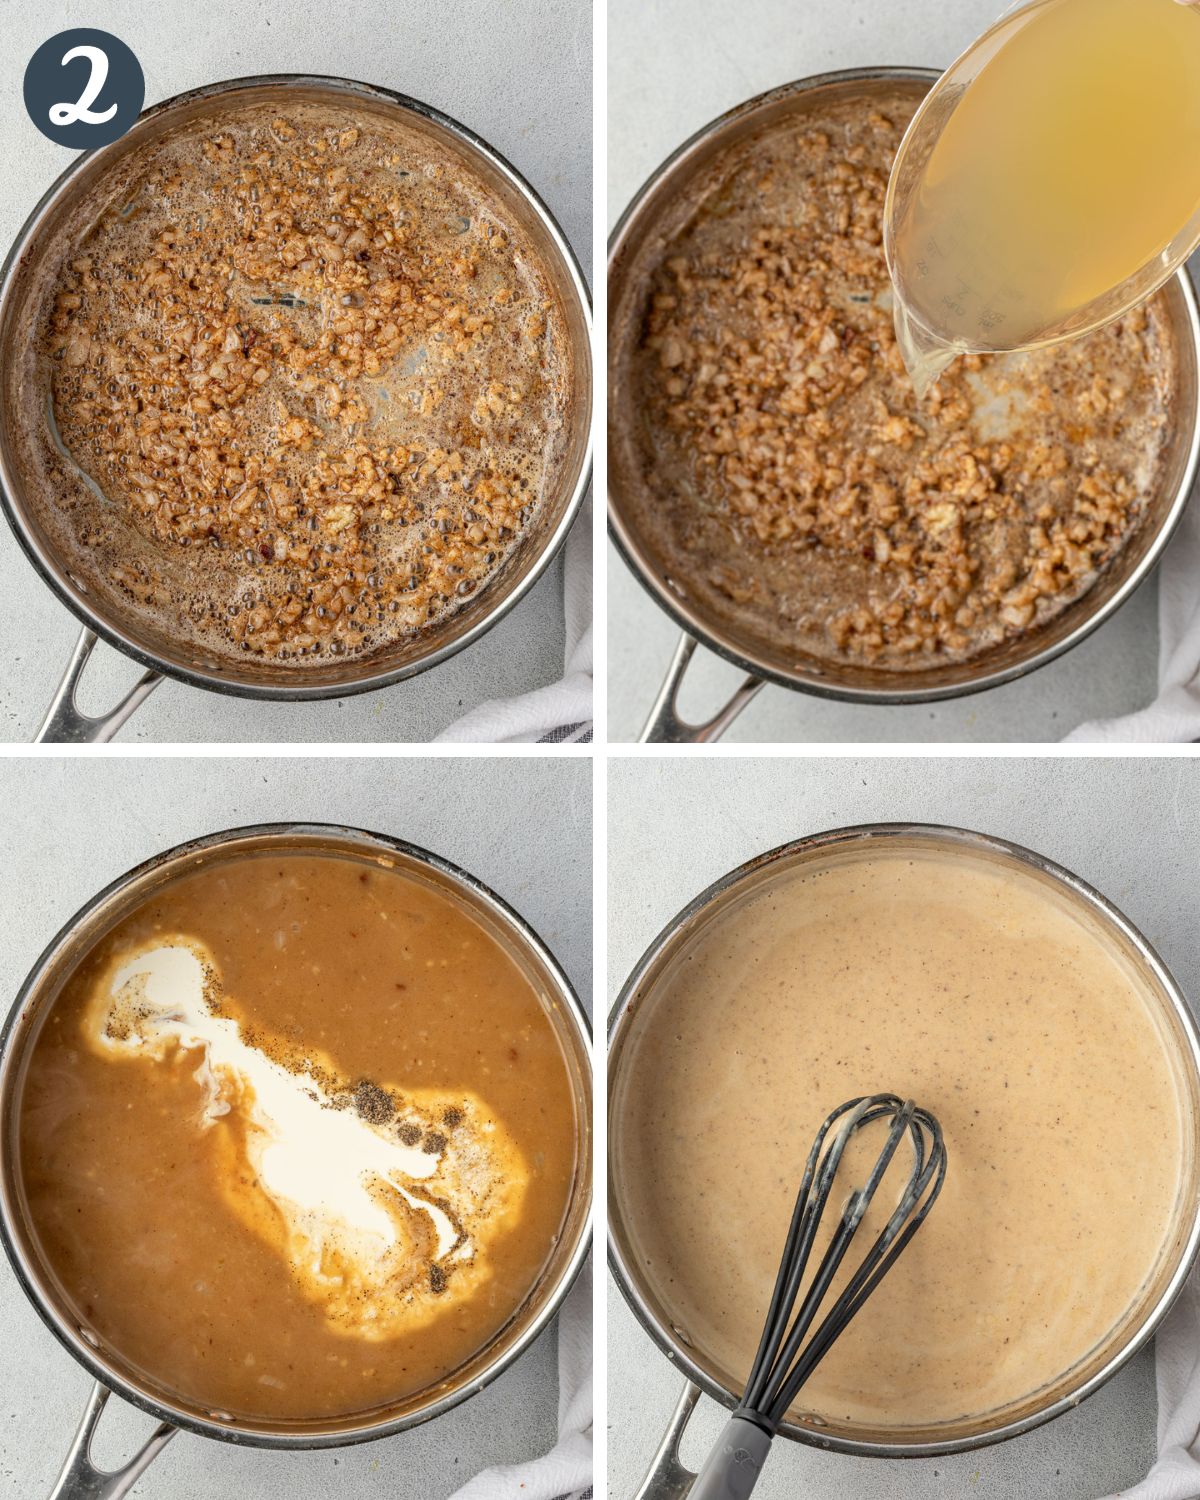 Collage showing the 4 steps of making homemade condensed soup.